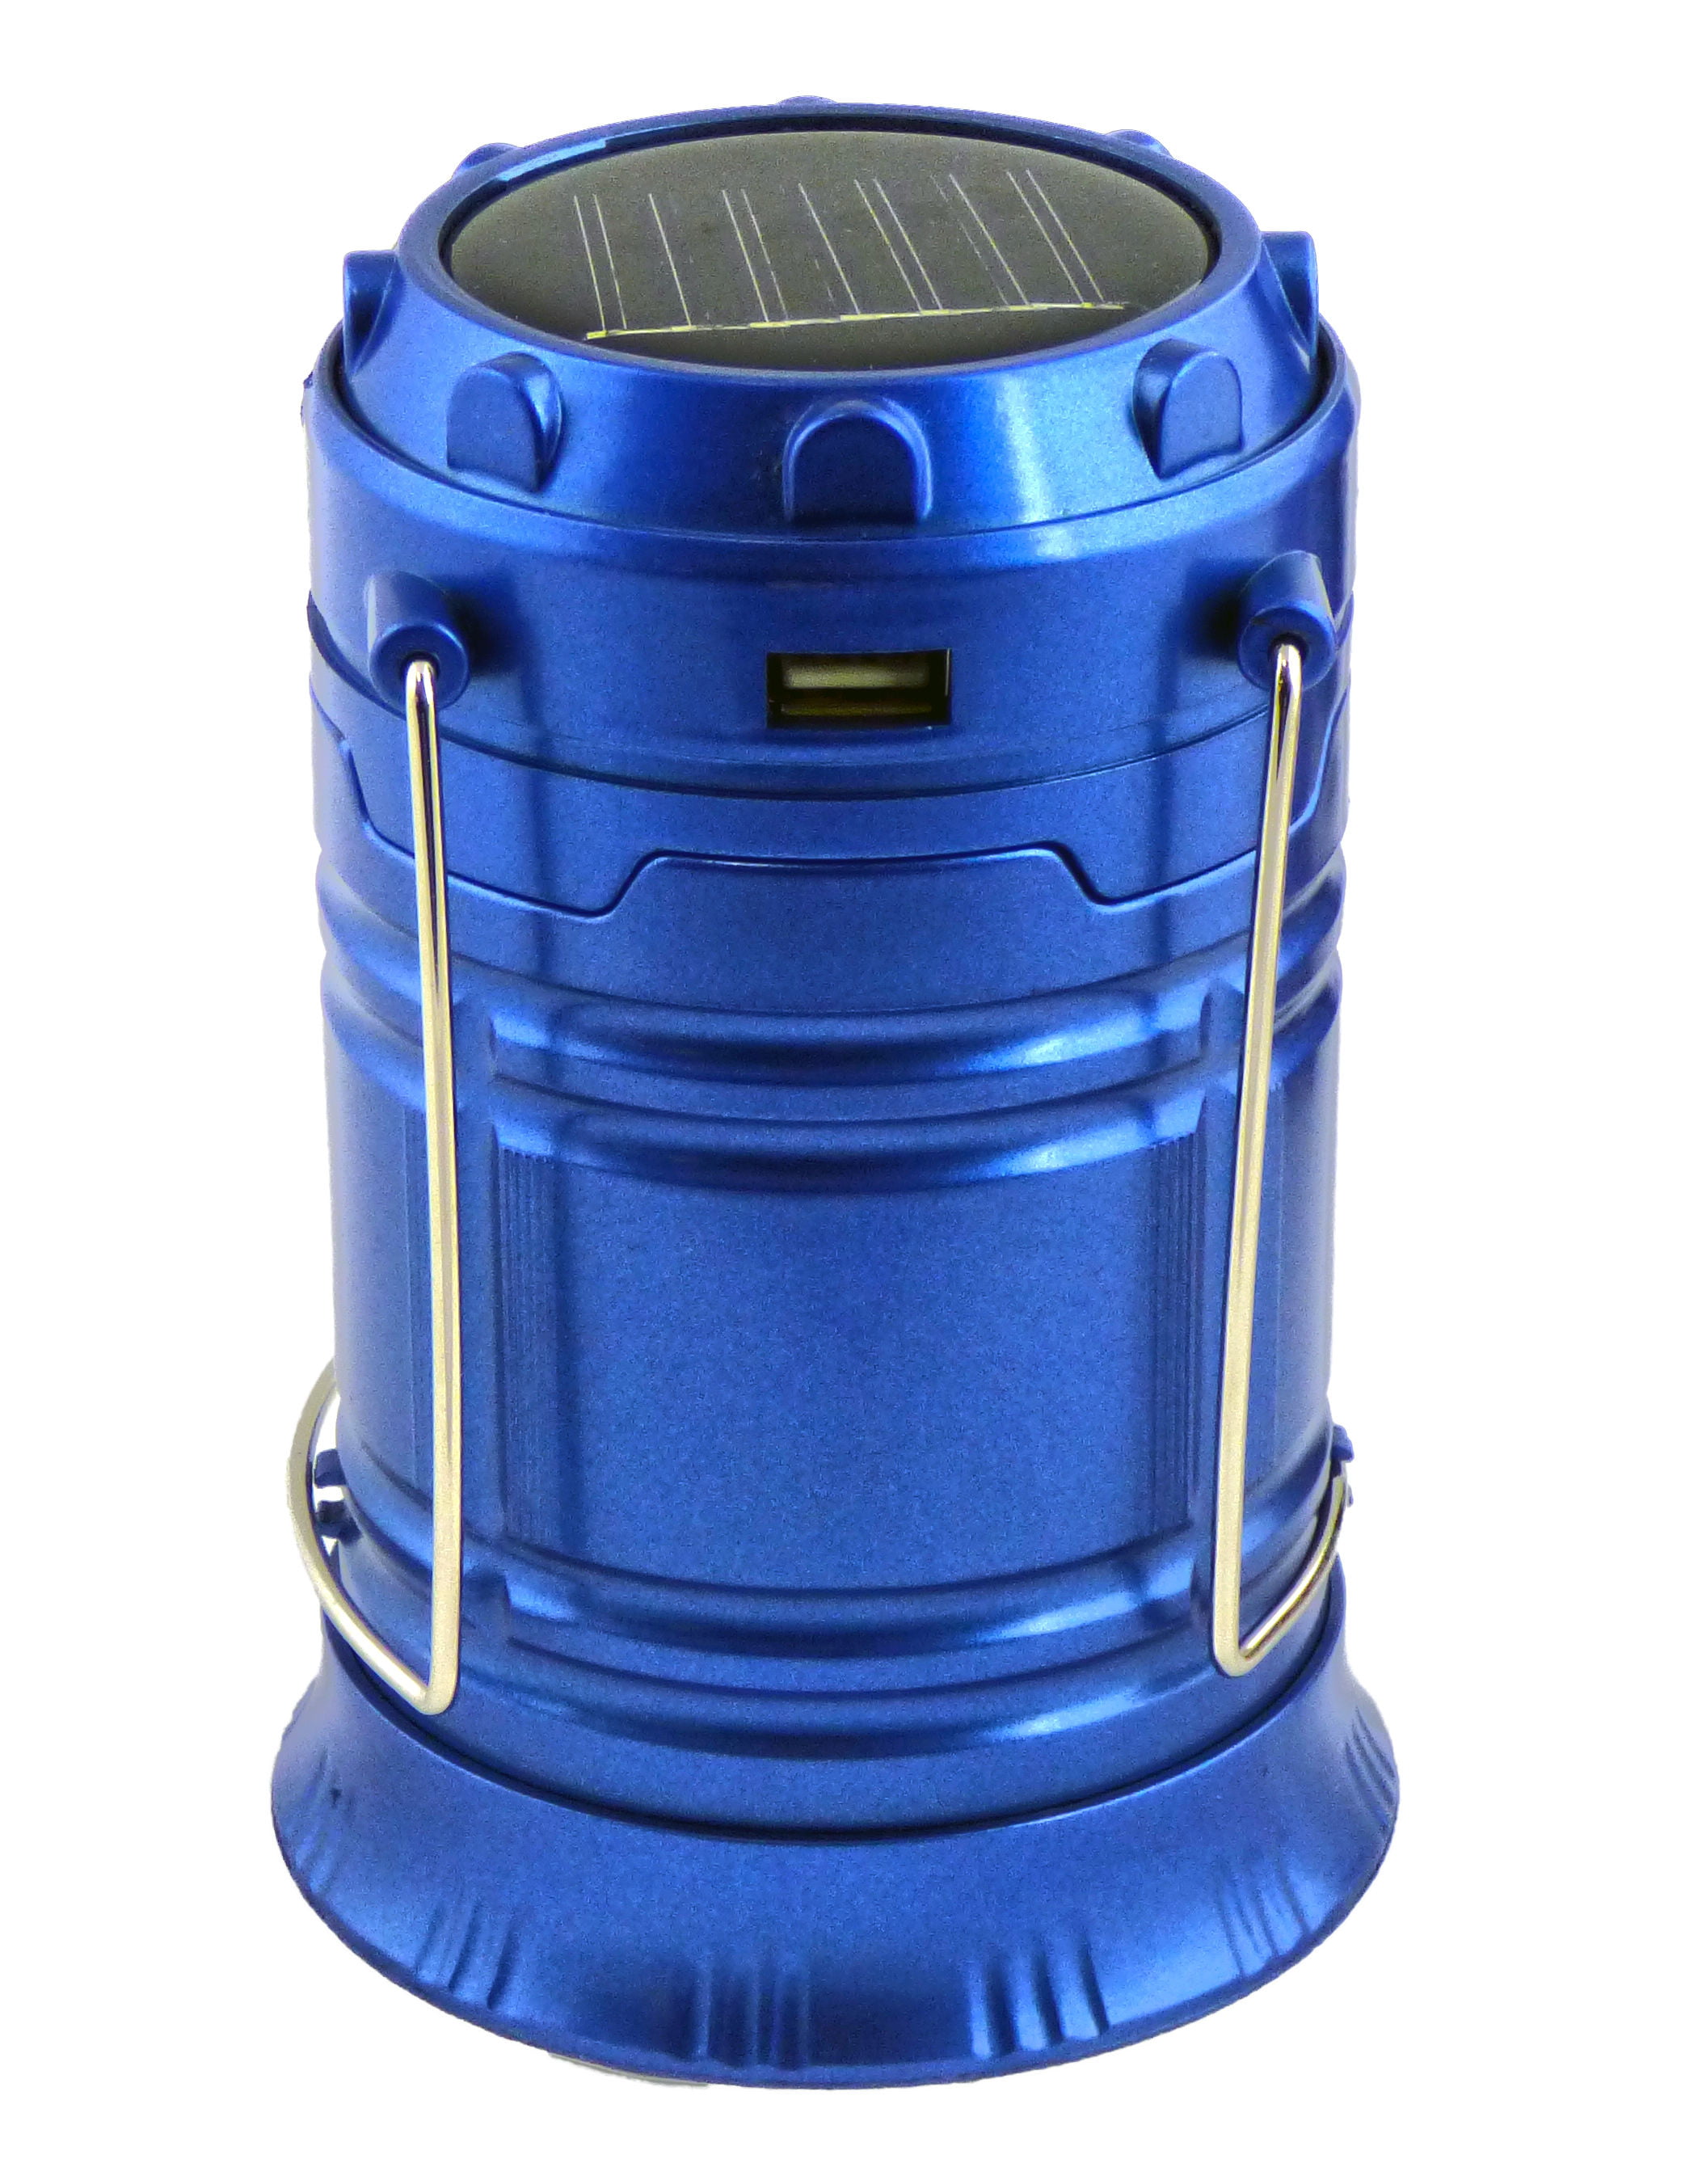 NEW - IMPROVED 3-in-1 Solar Collapsible Lantern